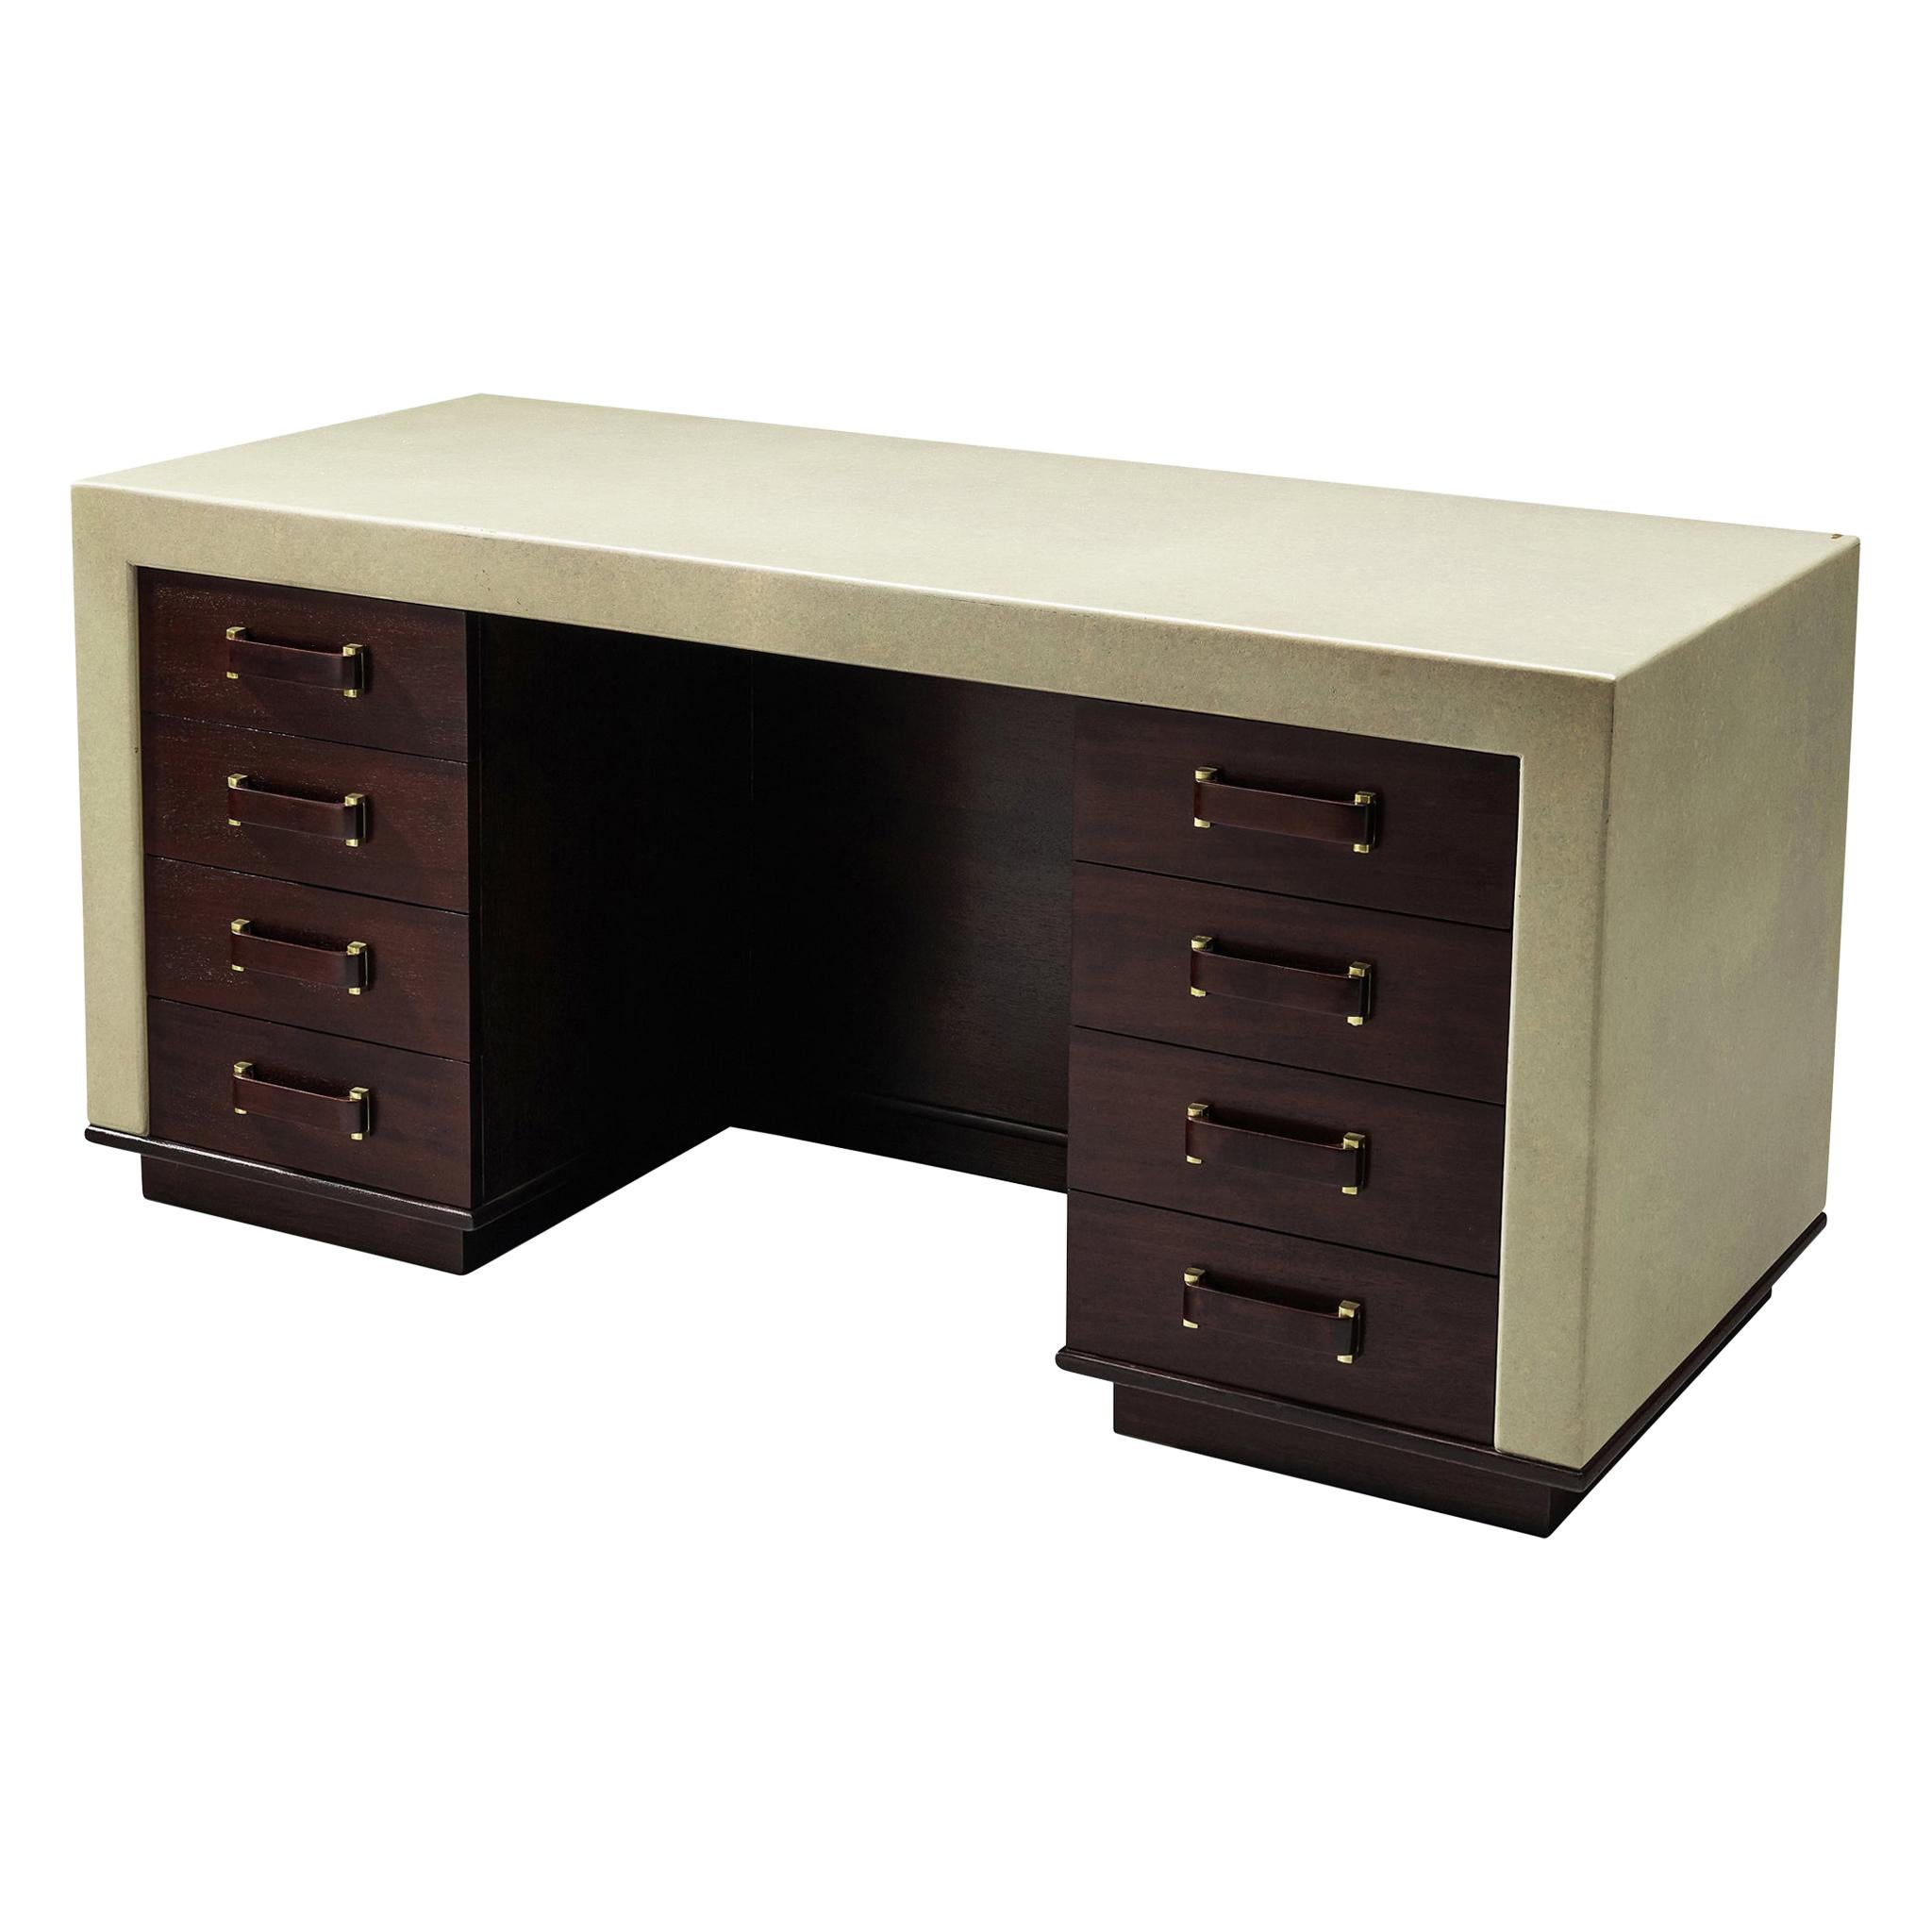 Exceptional Paul Frankl Free-Standing Desk in Mahogany and Cork